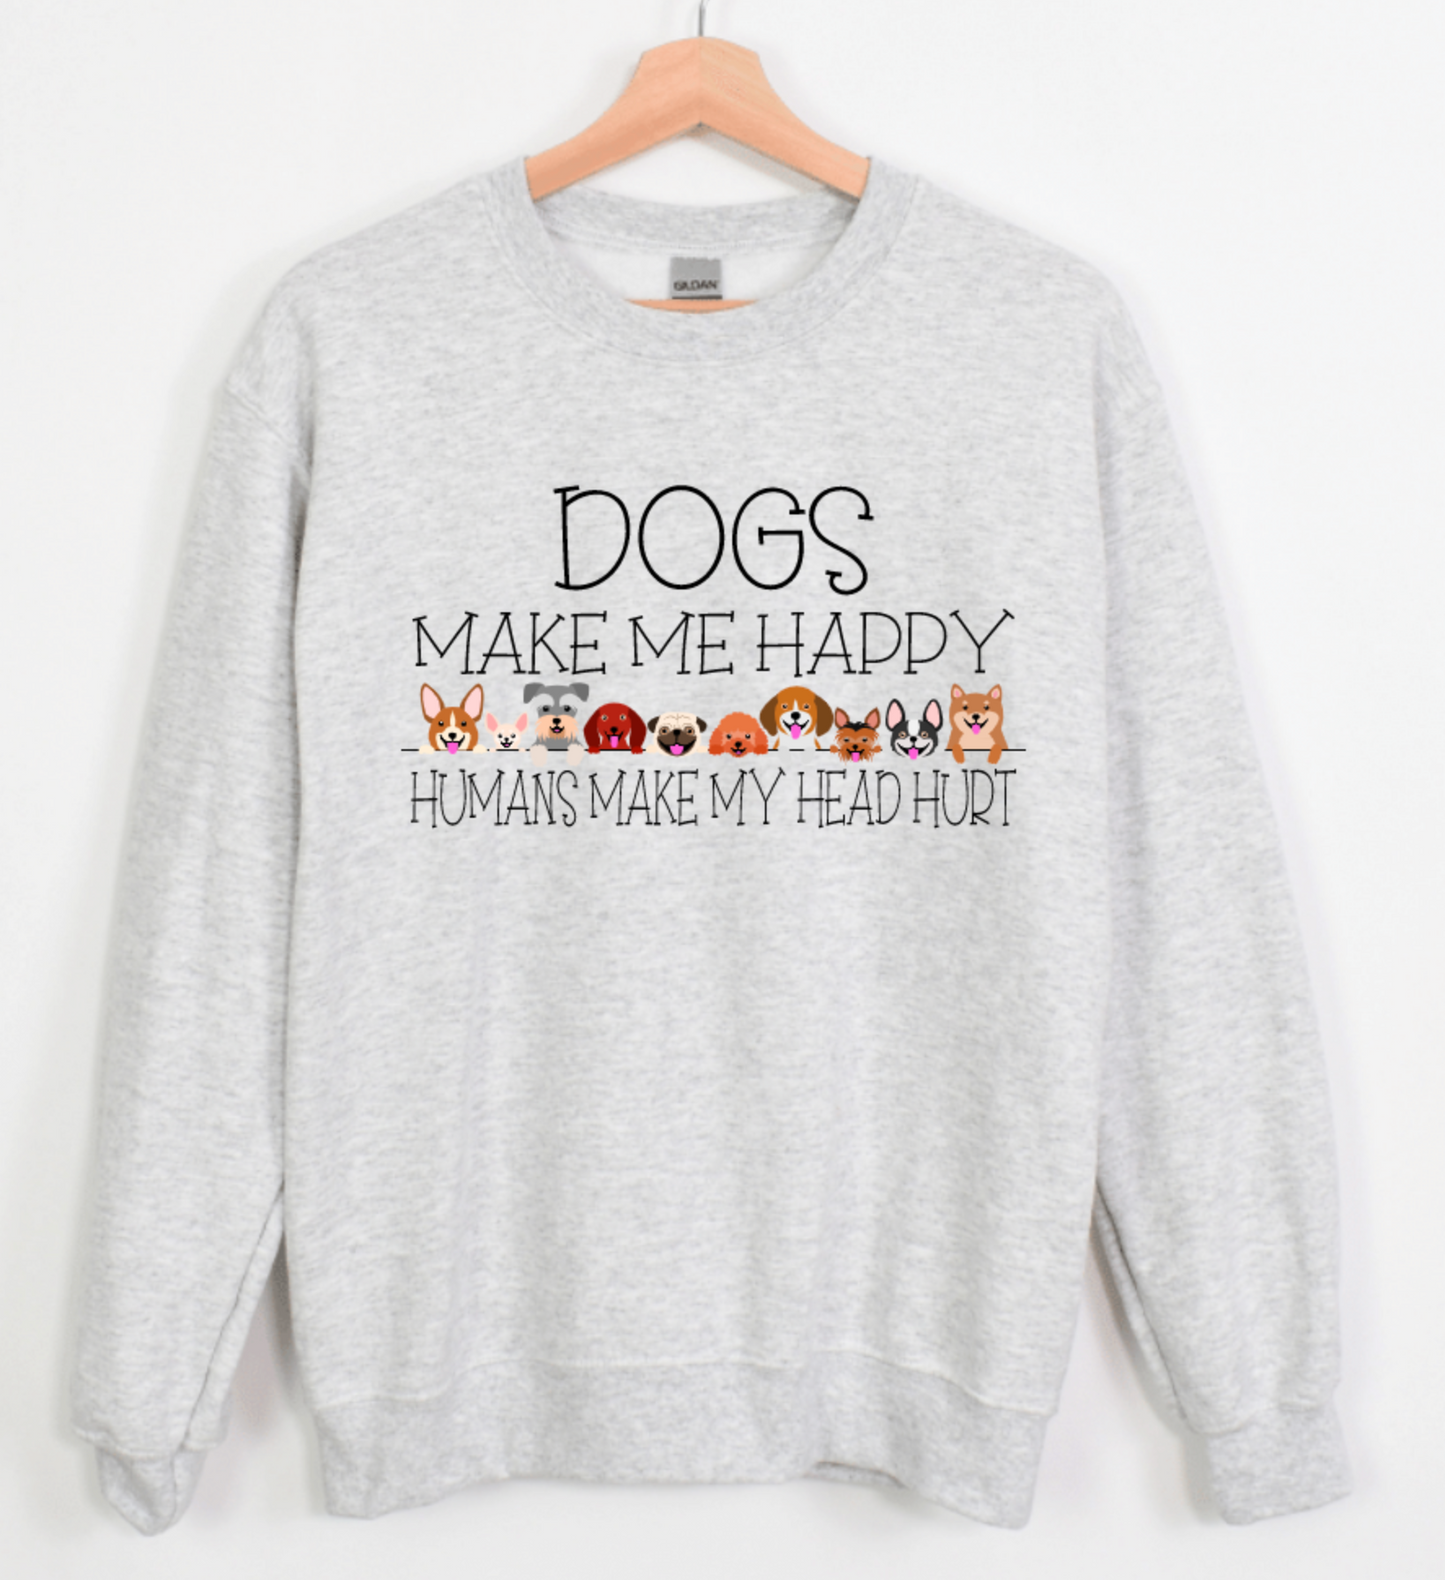 DOGS MAKE ME HAPPY HUMANS MAKE MY HEAD HURT FRONT AND BACK DESIGN